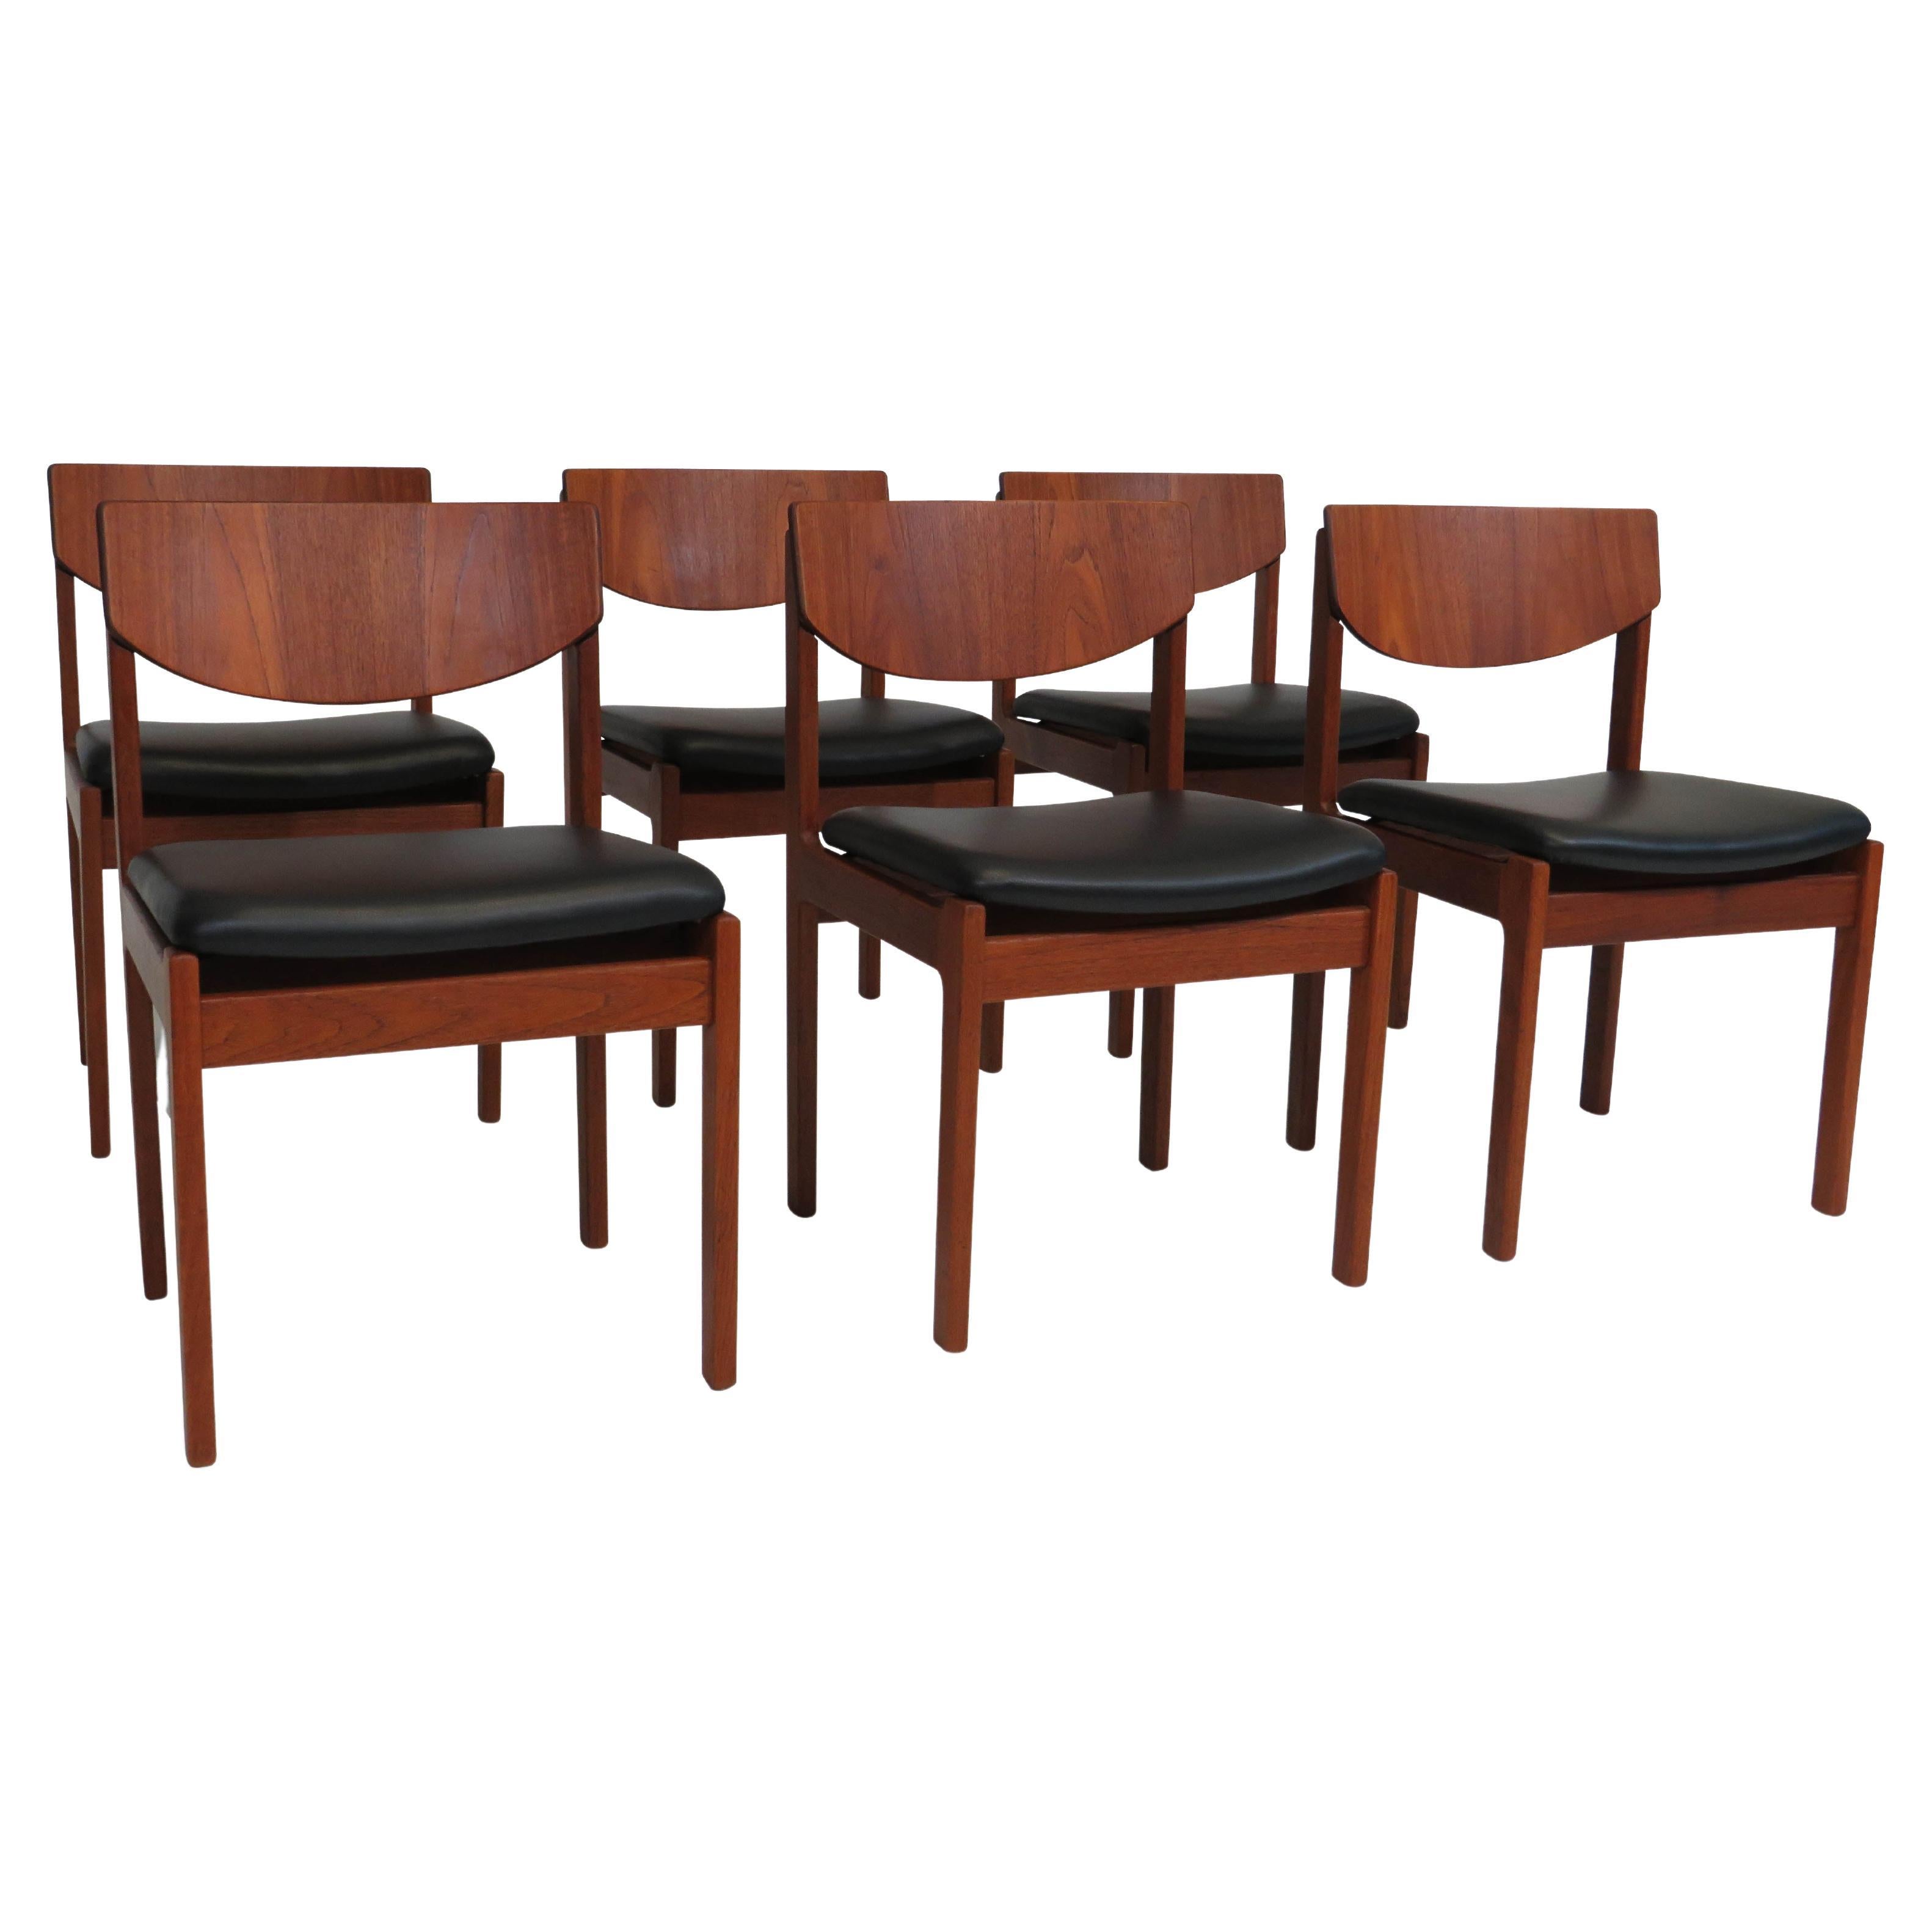 Danish Teak Dining Chairs in New Black Leather For Sale